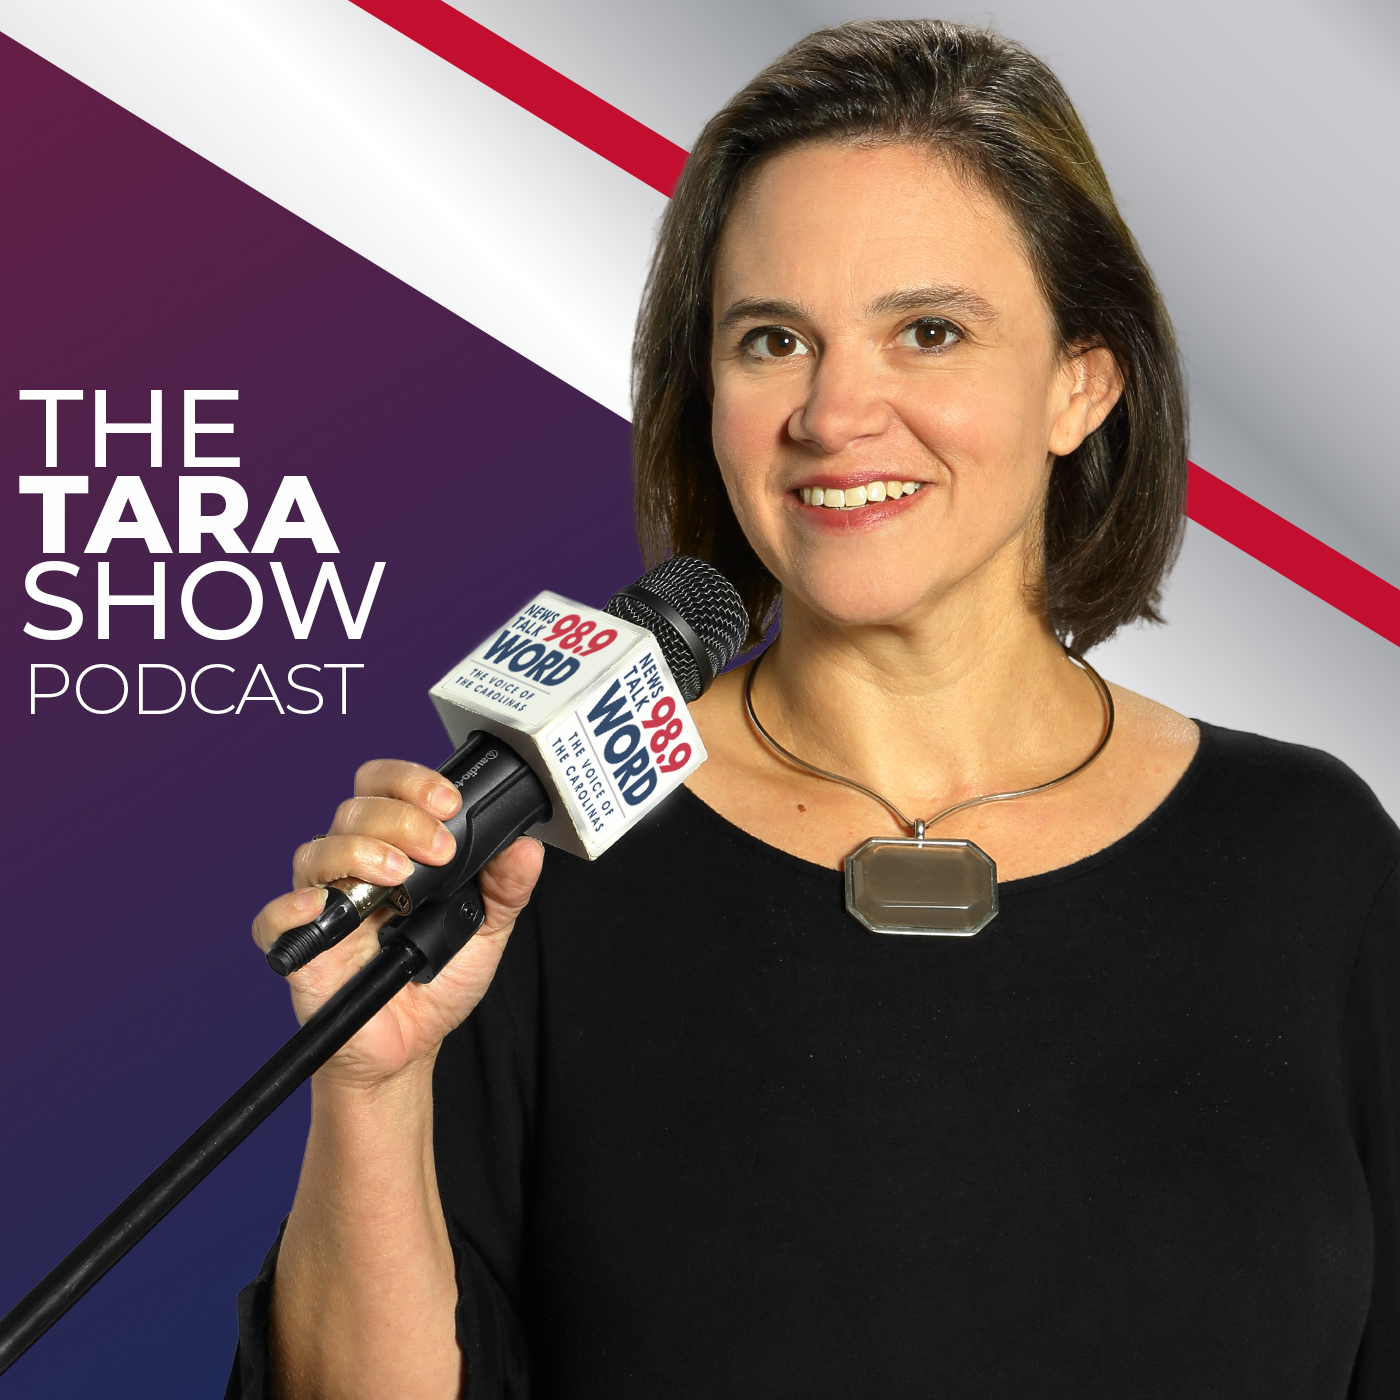 Hour 2: The Tara Show - “Biden’s ‘Border Crackdown’ and Terrorism” “Campaign Donations and the Upcoming Debate” “The Price of ‘Making it Fair’” “Covid Lethality”